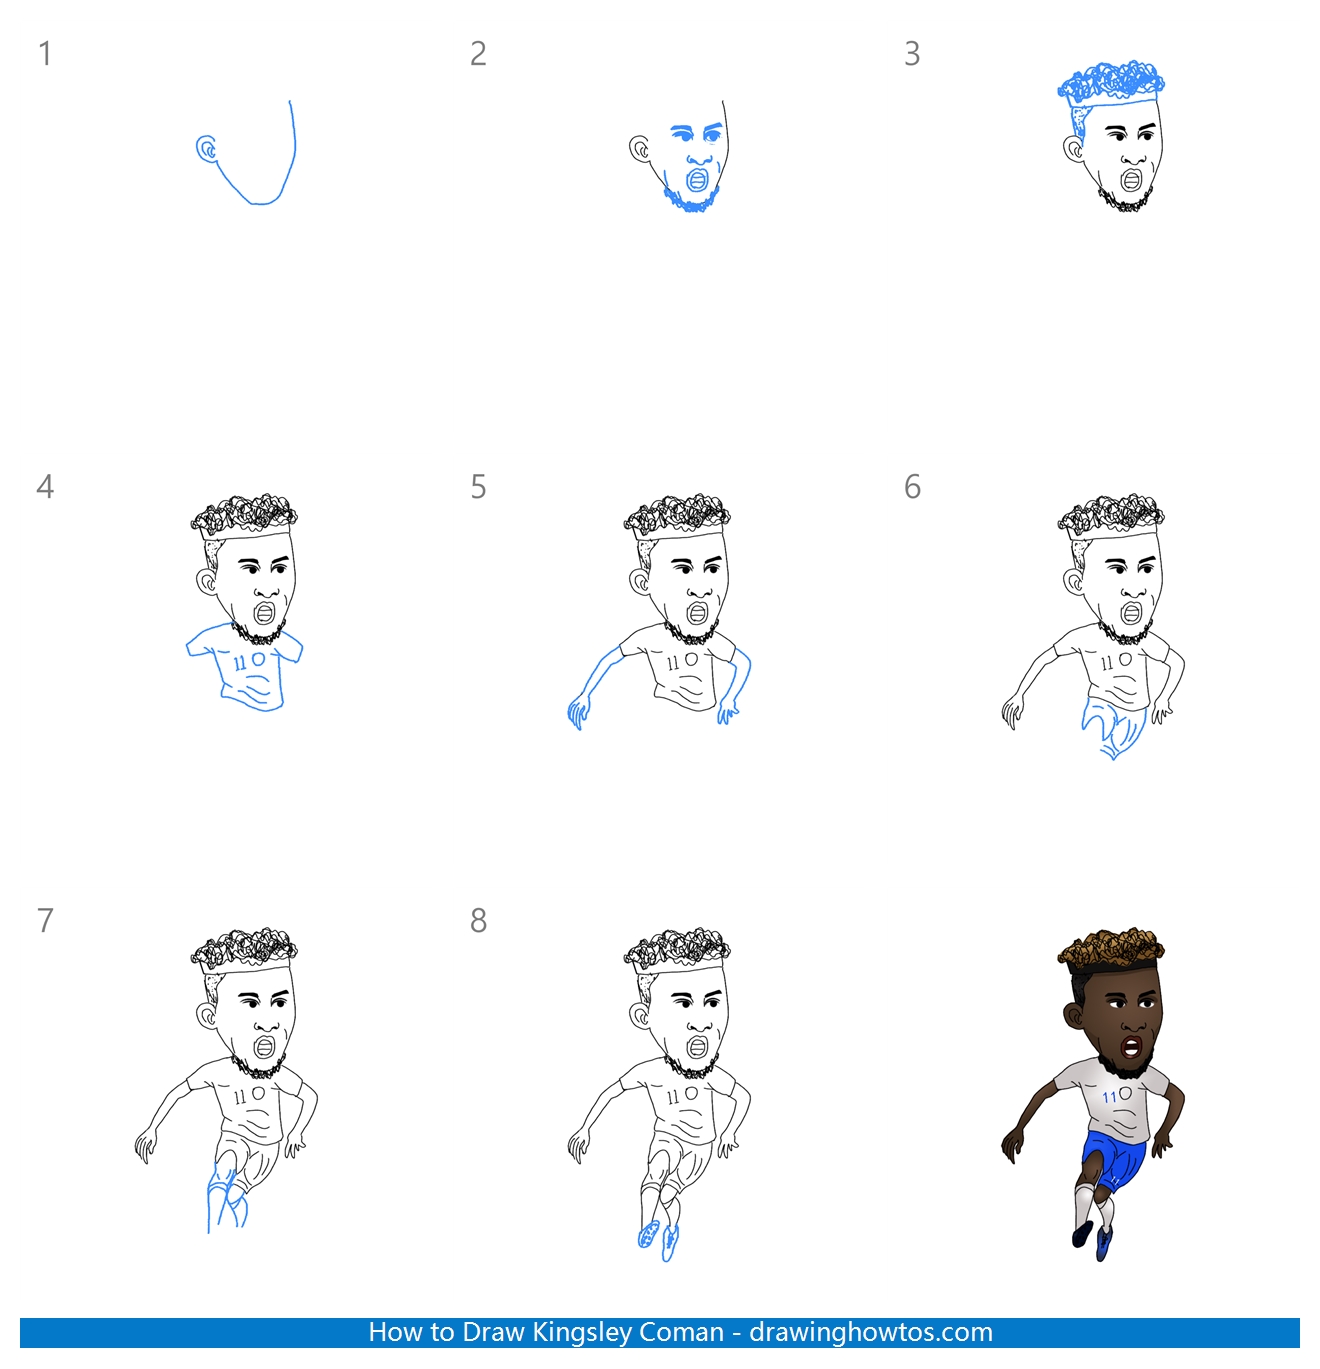 How to Draw Kingsley Coman Step by Step